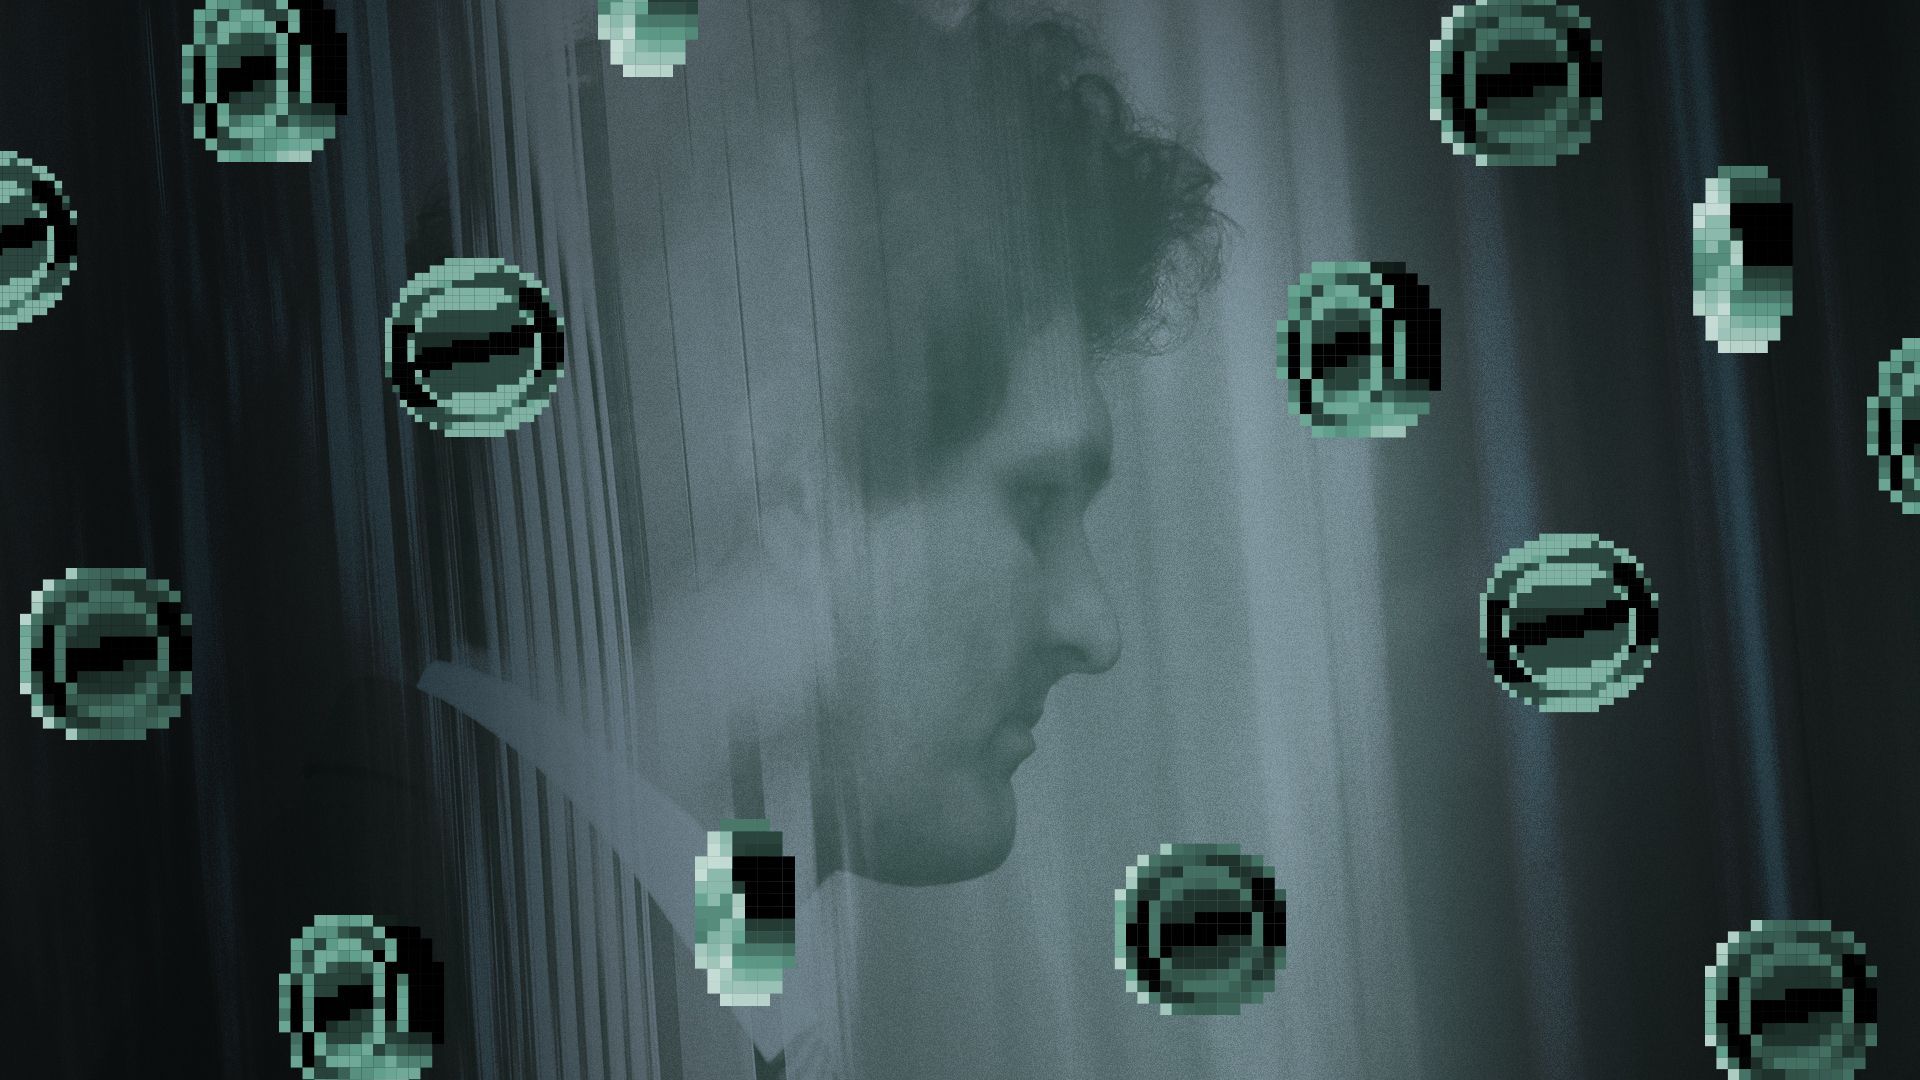 Photo illustration of Sam Bankman-Fried behind a wall of falling pixelated coins colored dark green